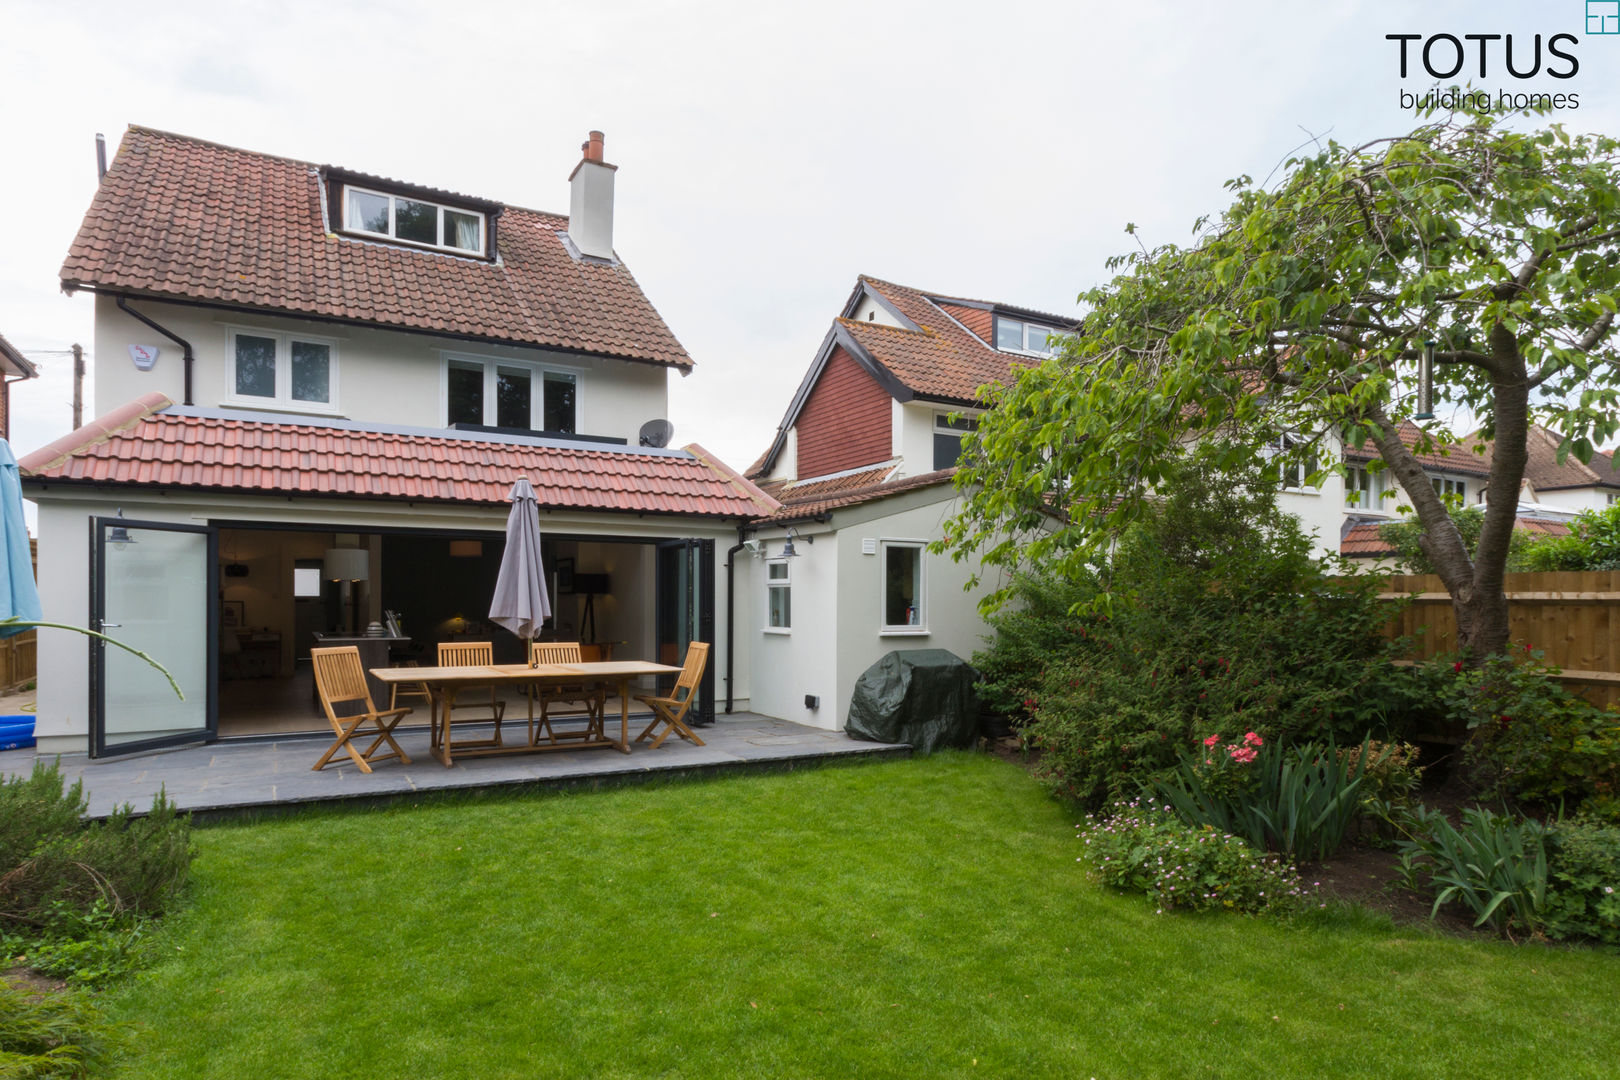 New life for a 1920s home - extension and full renovation, Thames Ditton, Surrey, TOTUS TOTUS منازل